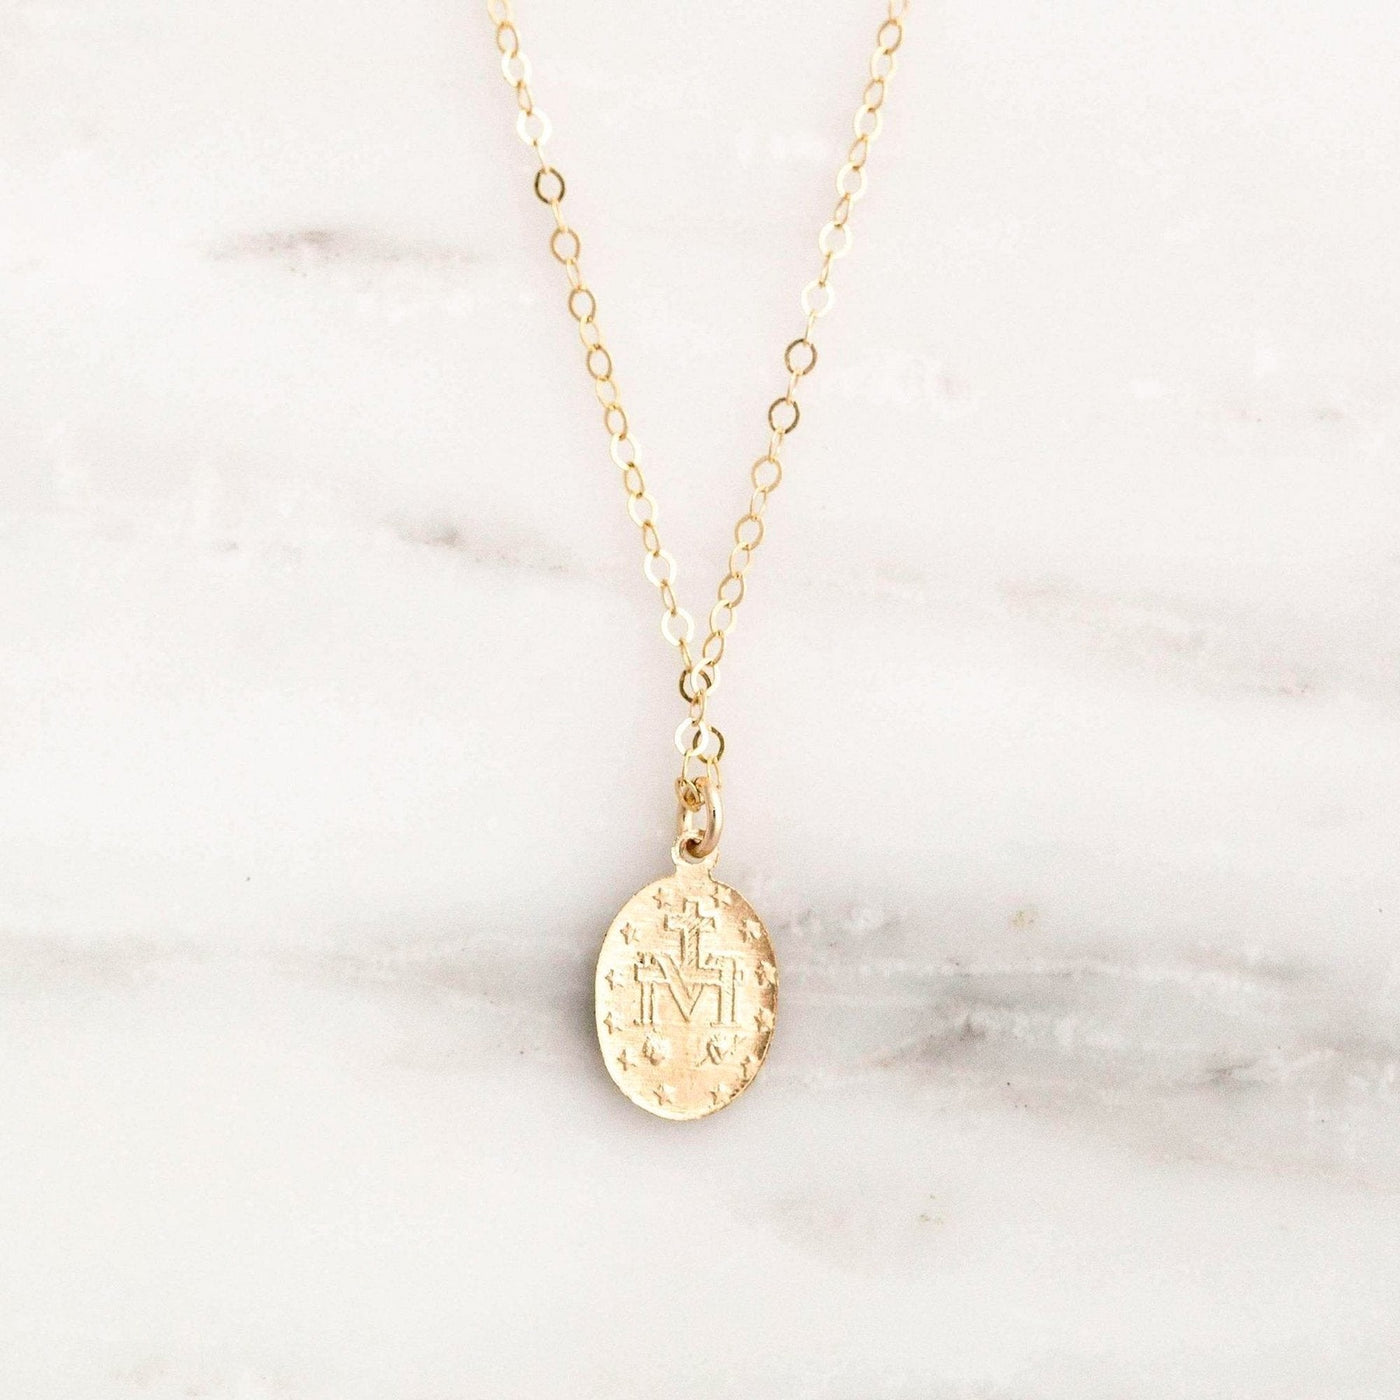 Tiny Virgin Mary Necklace by Simple & Dainty Jewelry